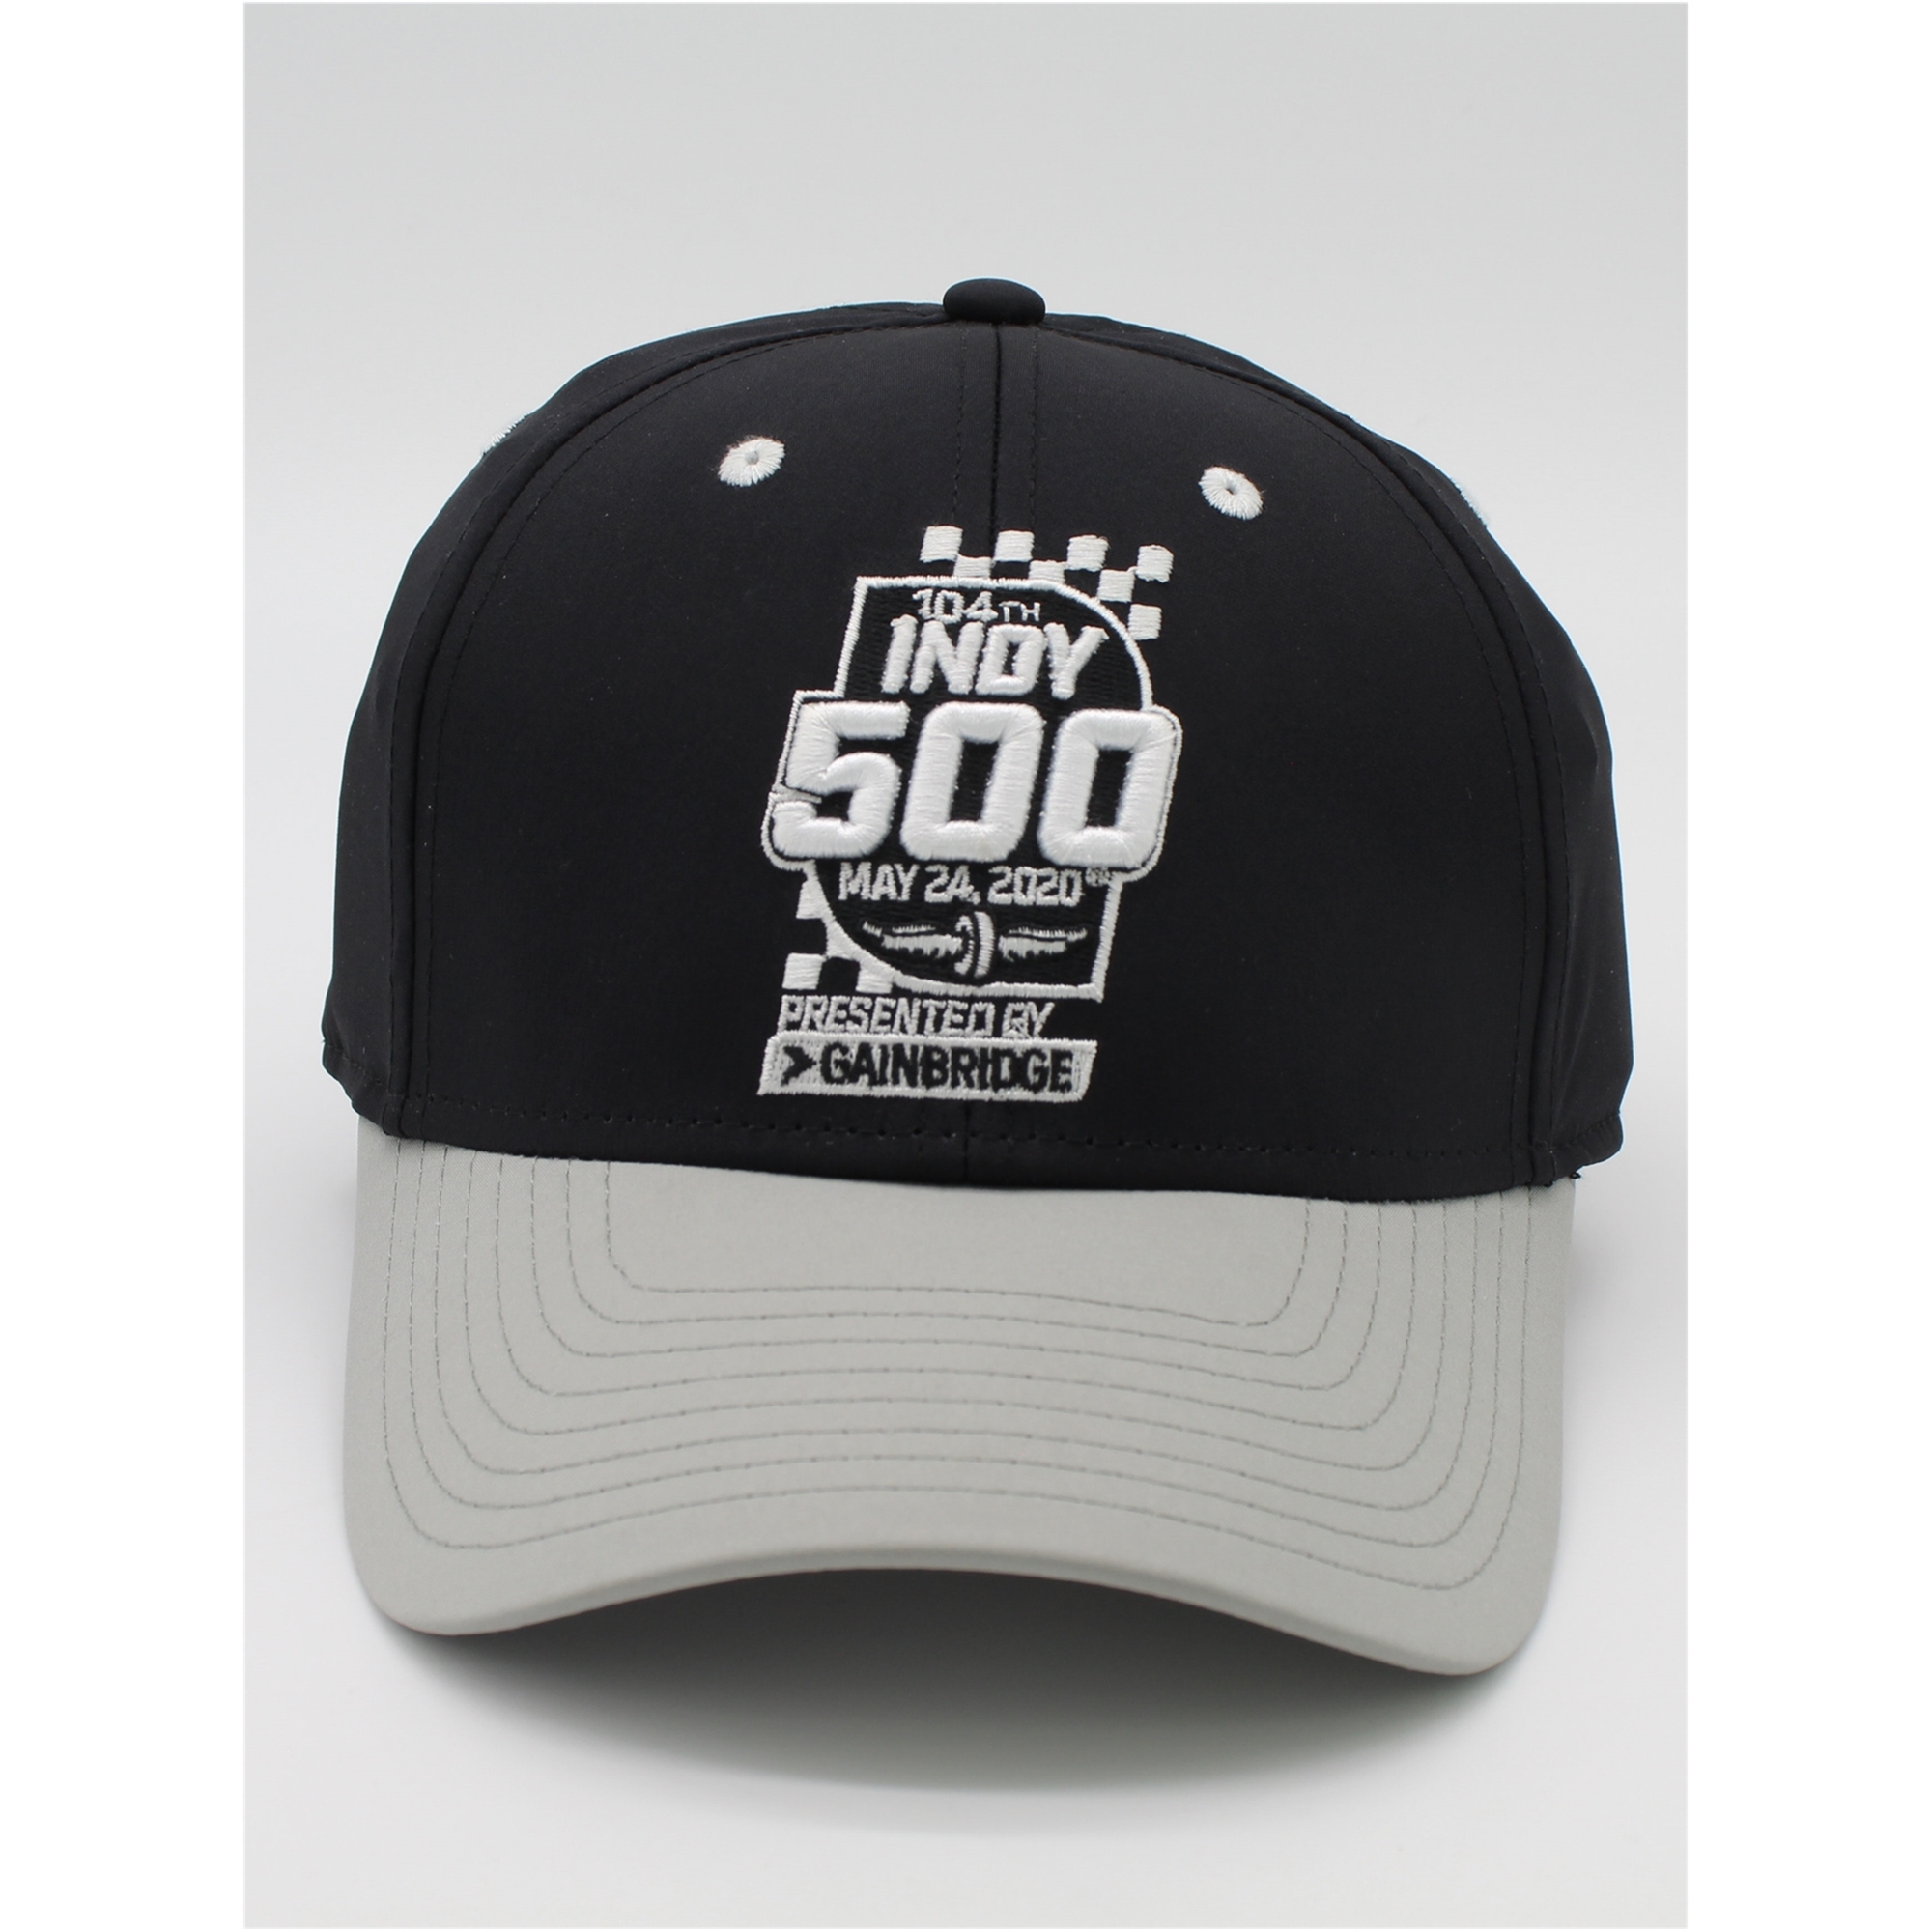 INDY 500 Mens Spectacle Baseball Cap, Black, S/M - image 4 of 4